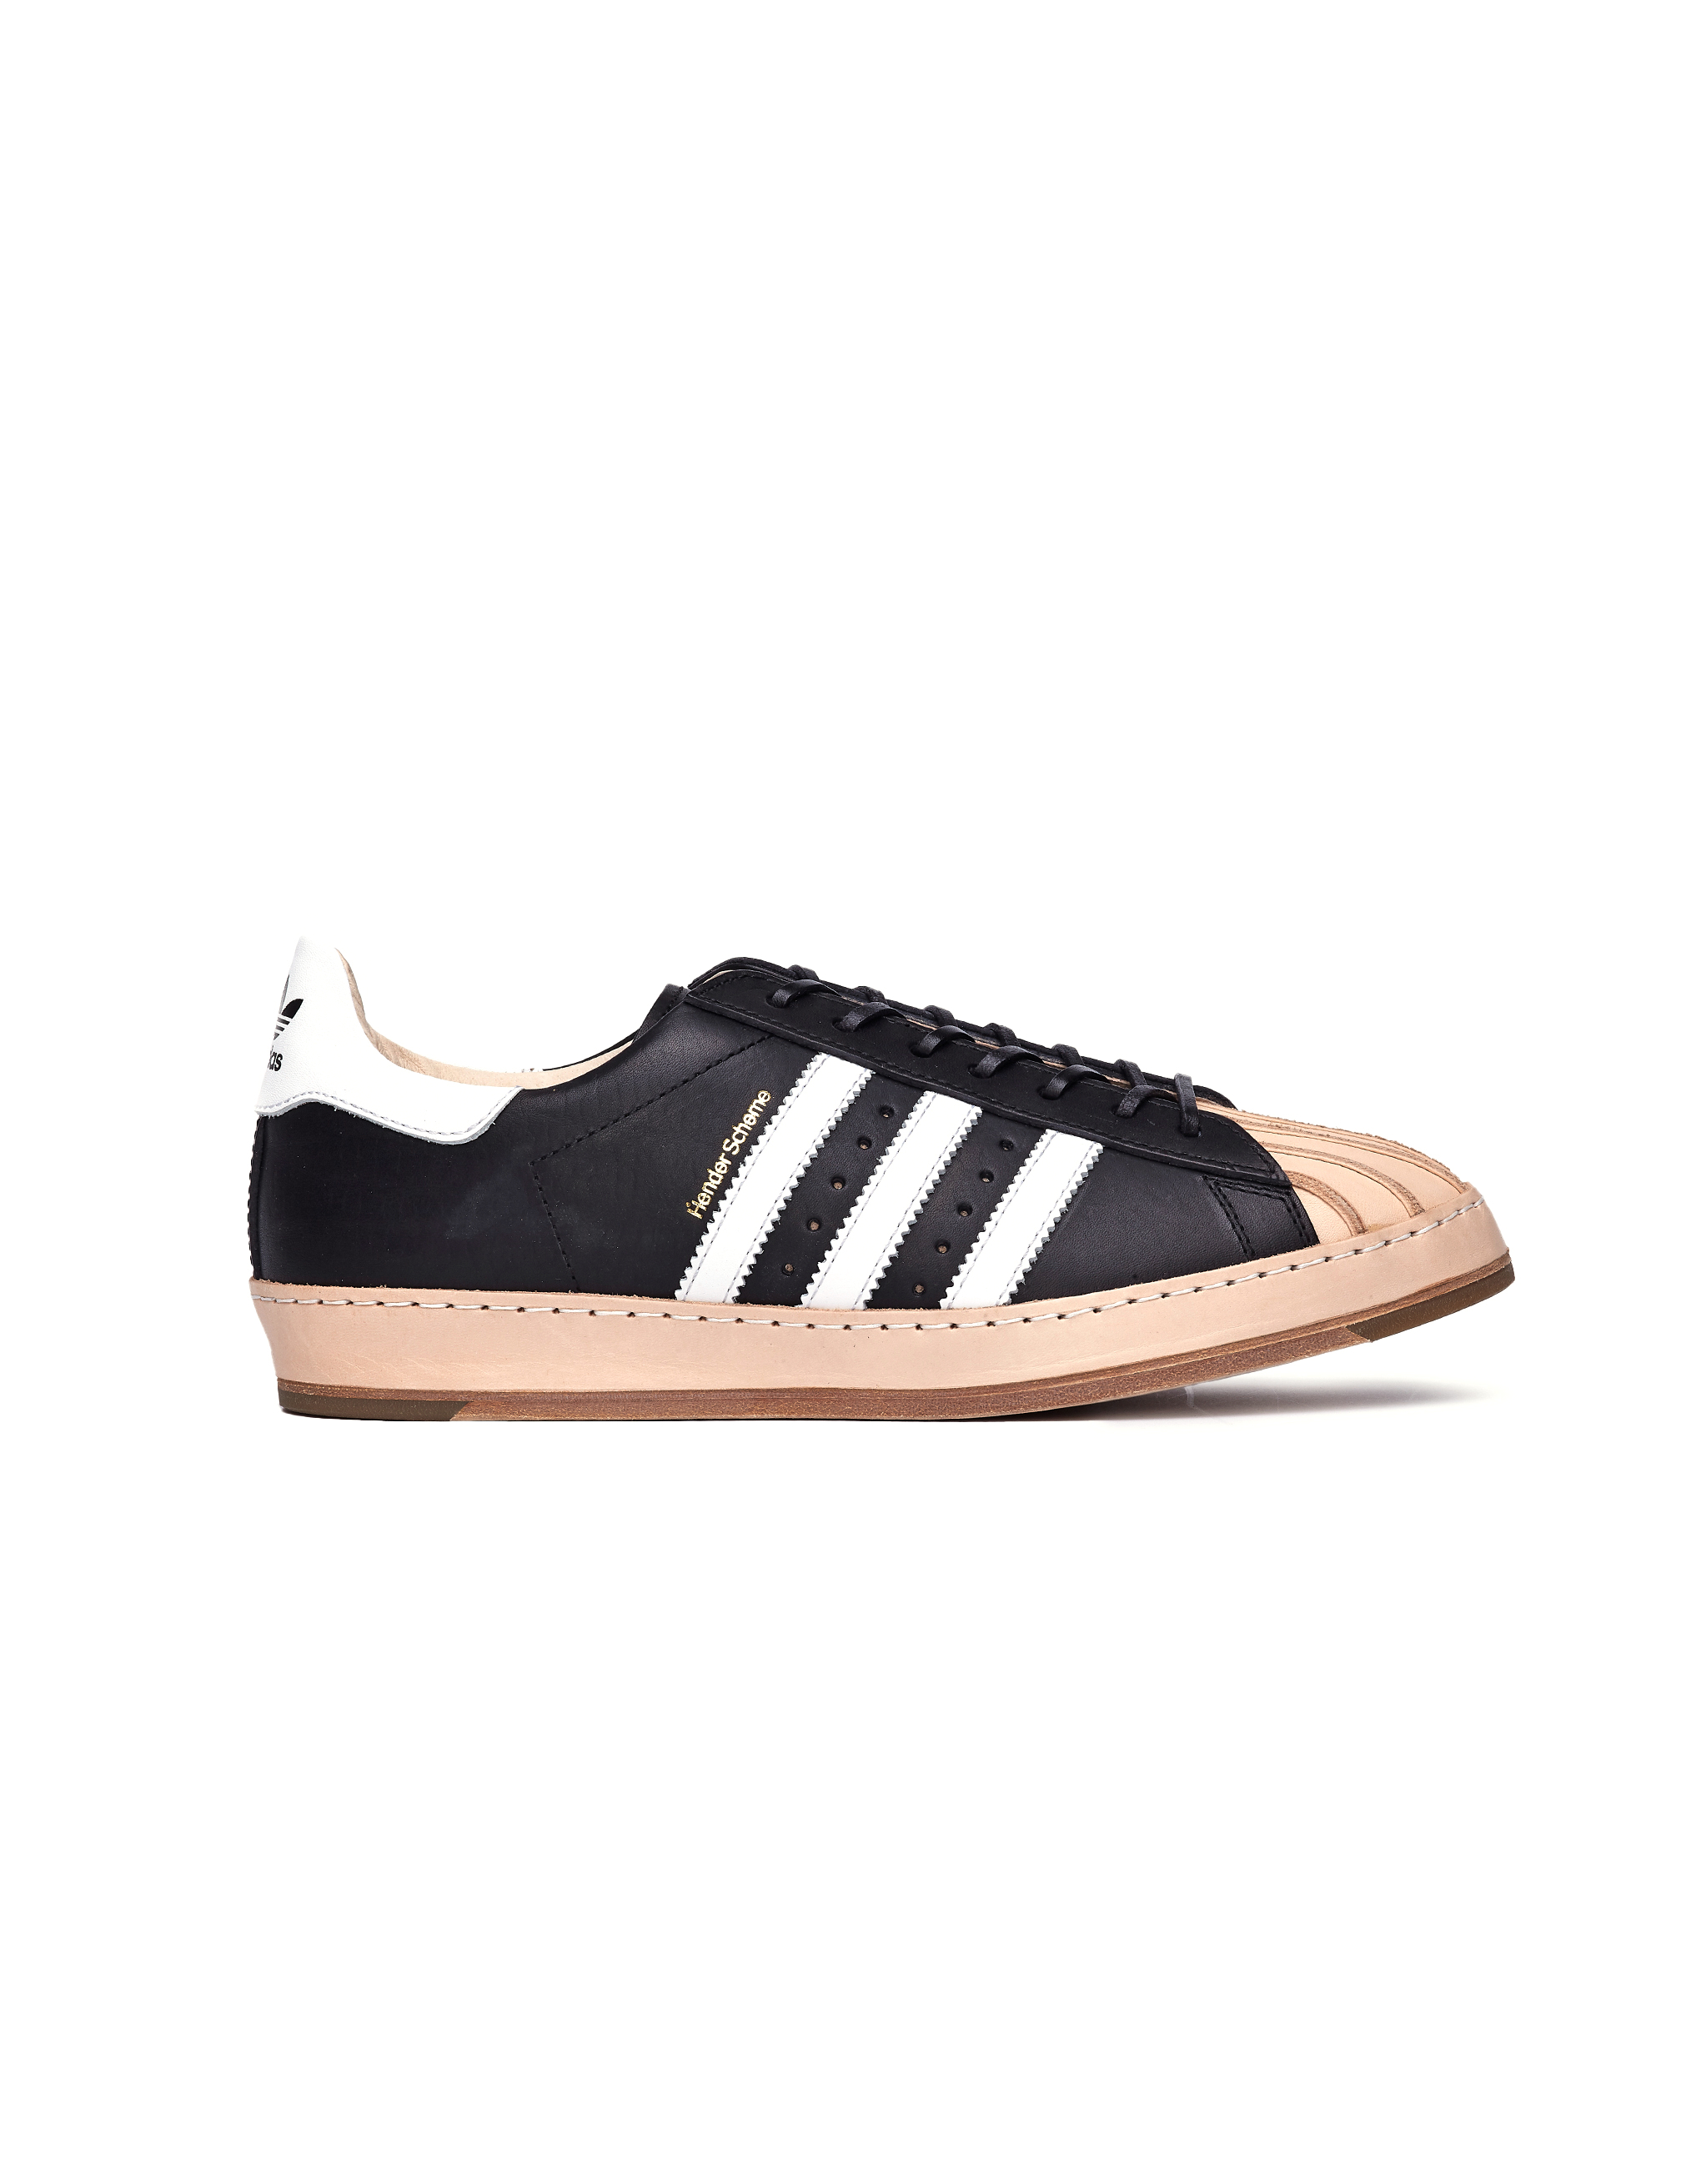 adidas superstar leather sneakers